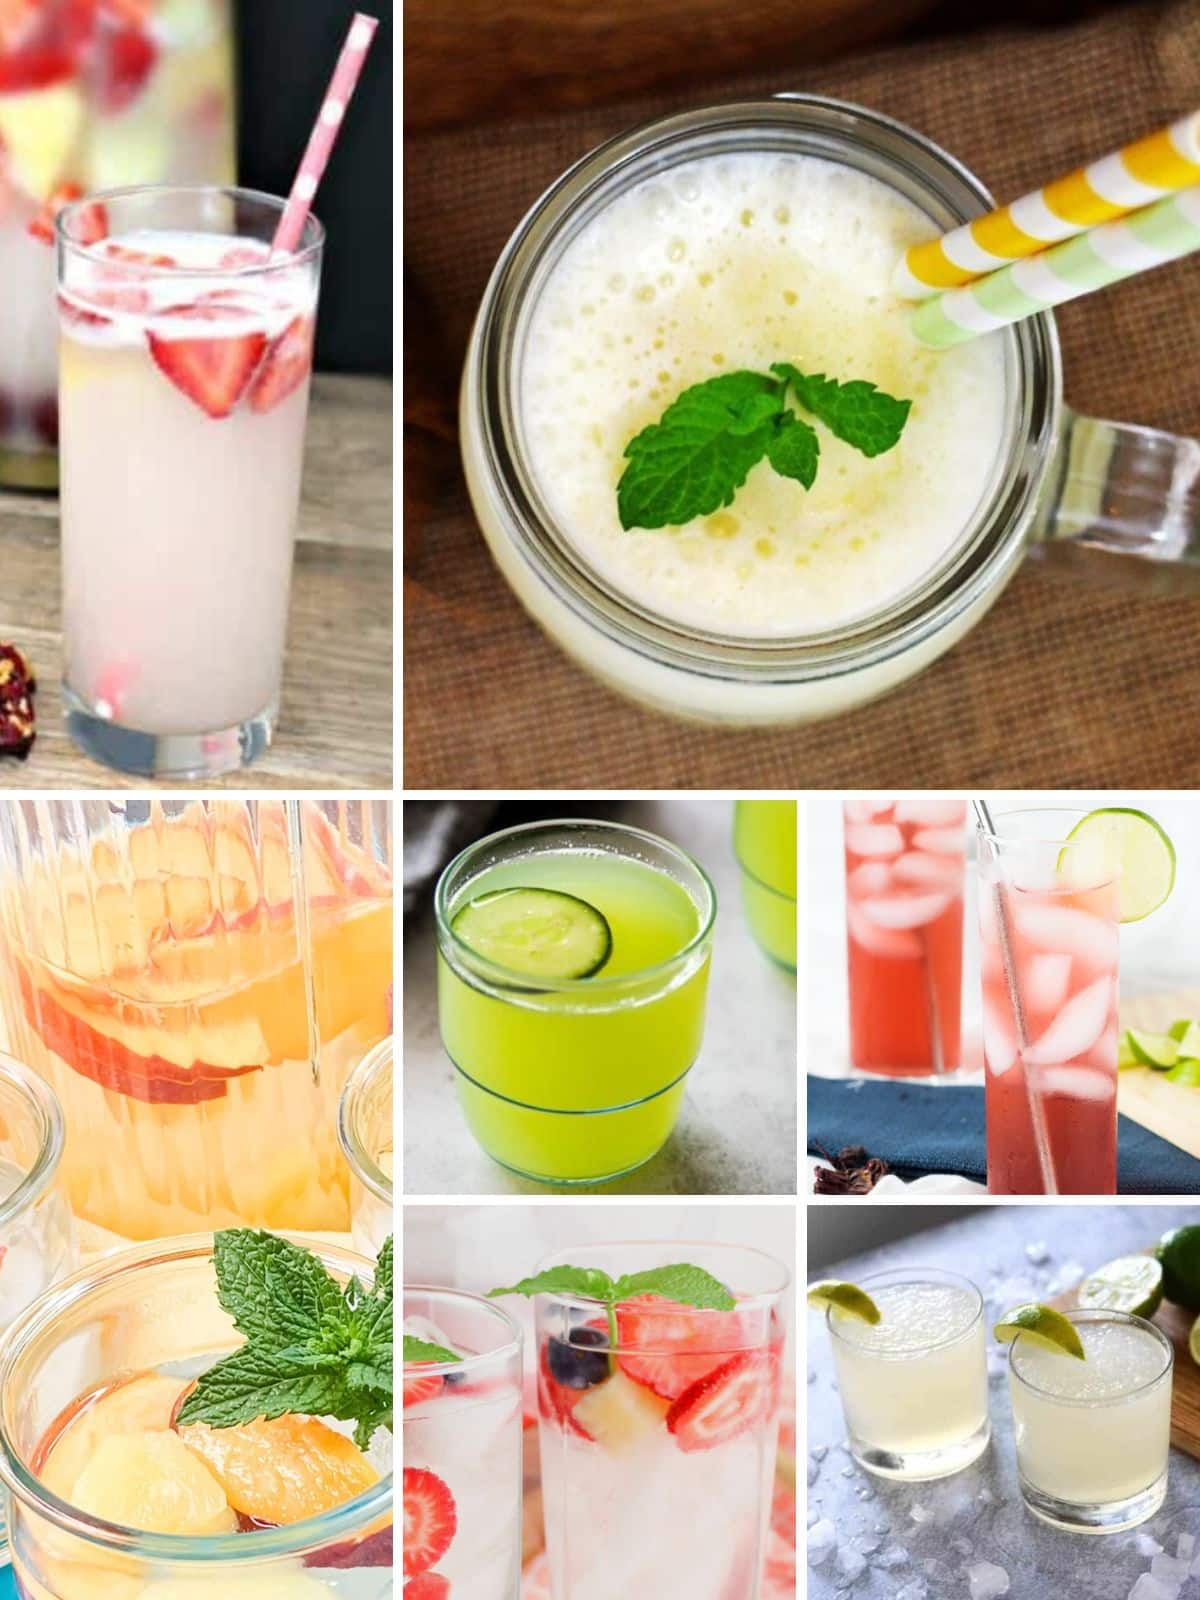 12 infused drink recipes with coconut water.